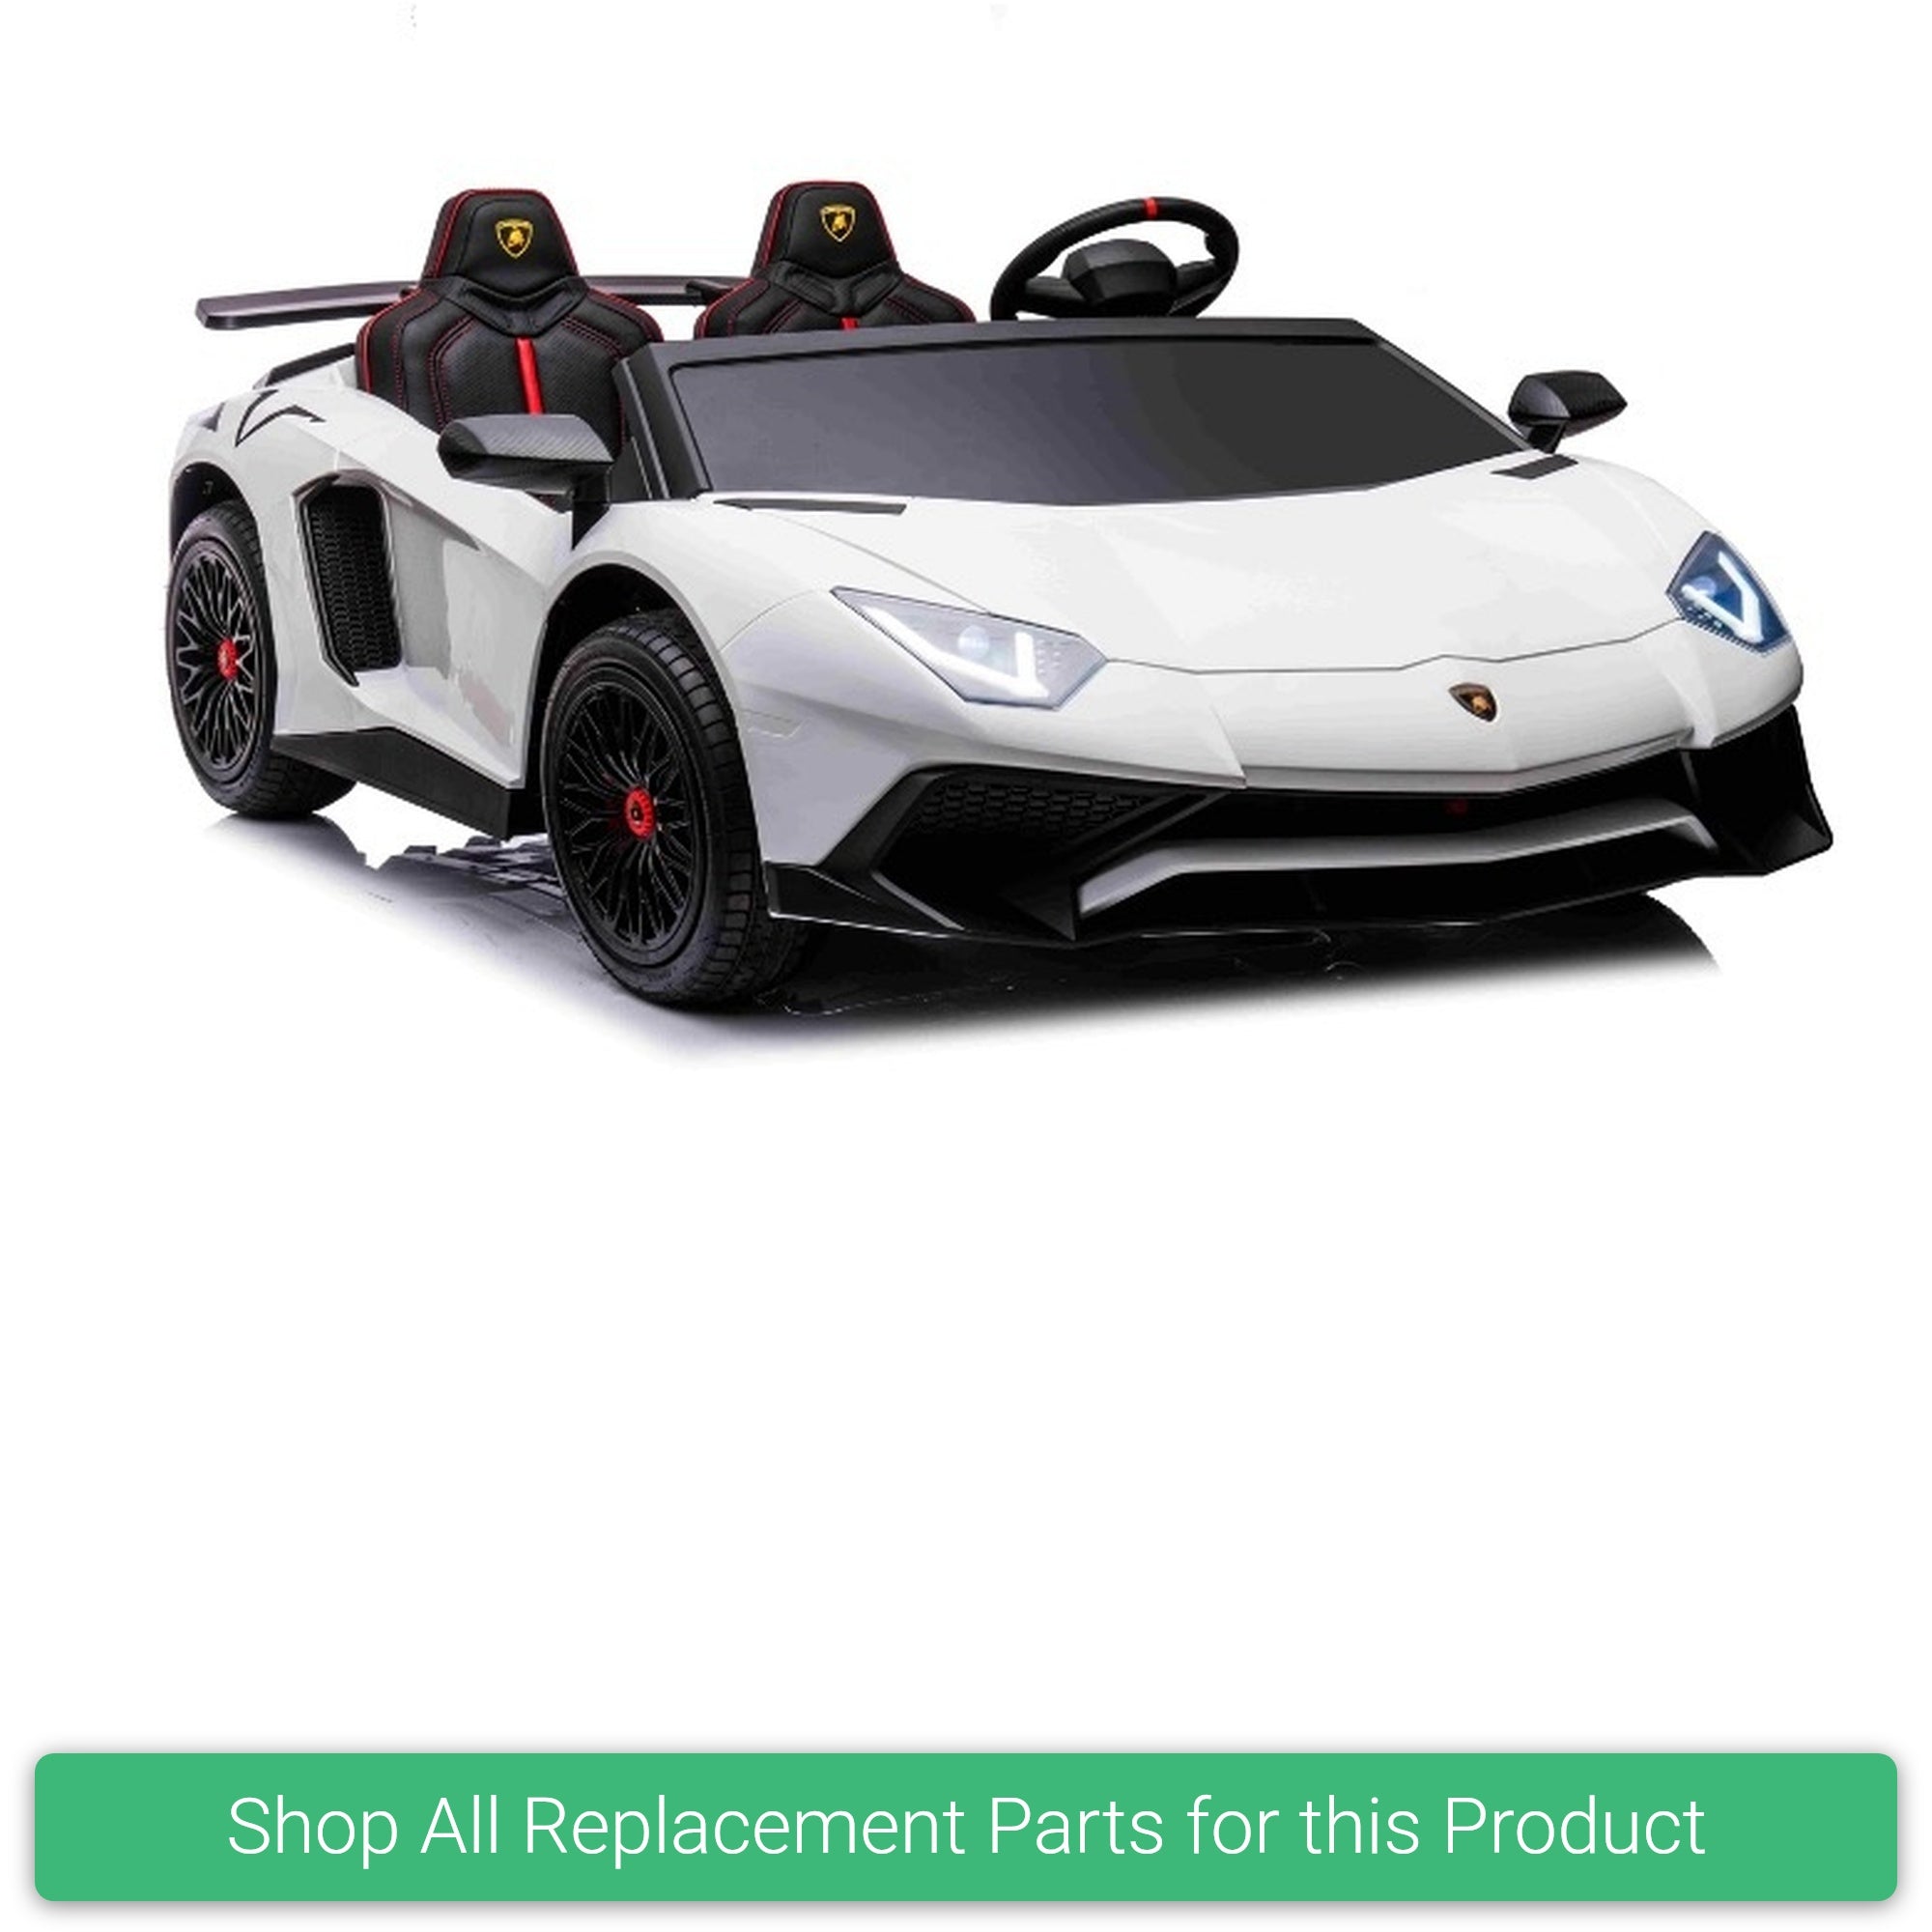 Replacement Parts and Spares for Kids Lamborghini Aventador 2 Seater In 24V - LAMBO-24-VARI - A8803